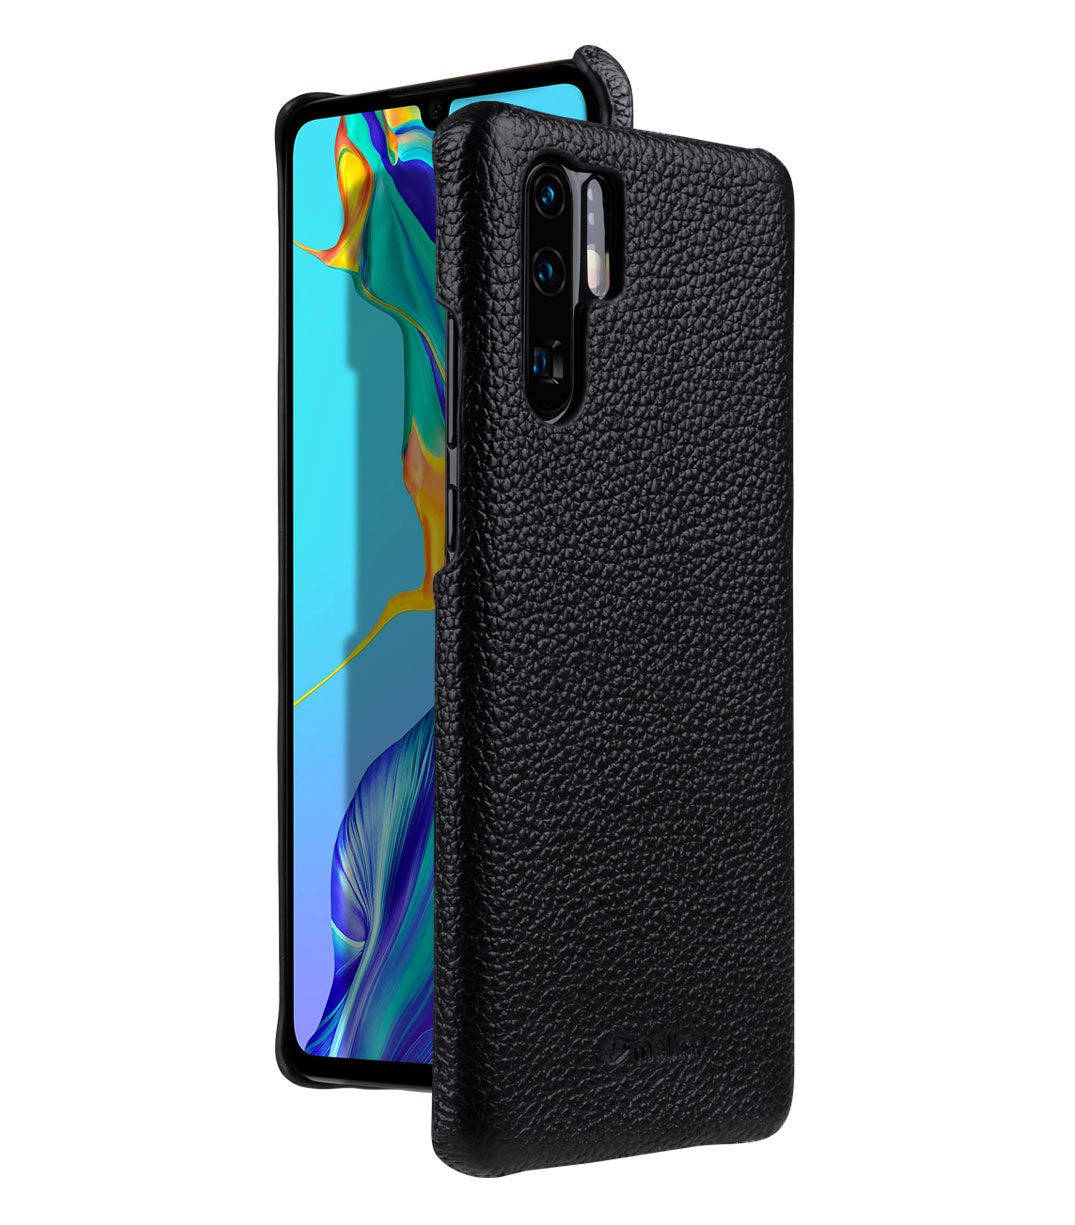 Cater champion Subjektiv Premium Leather Snap Cover Case for Huawei P30 Pro – Melkco Phone  Accessories